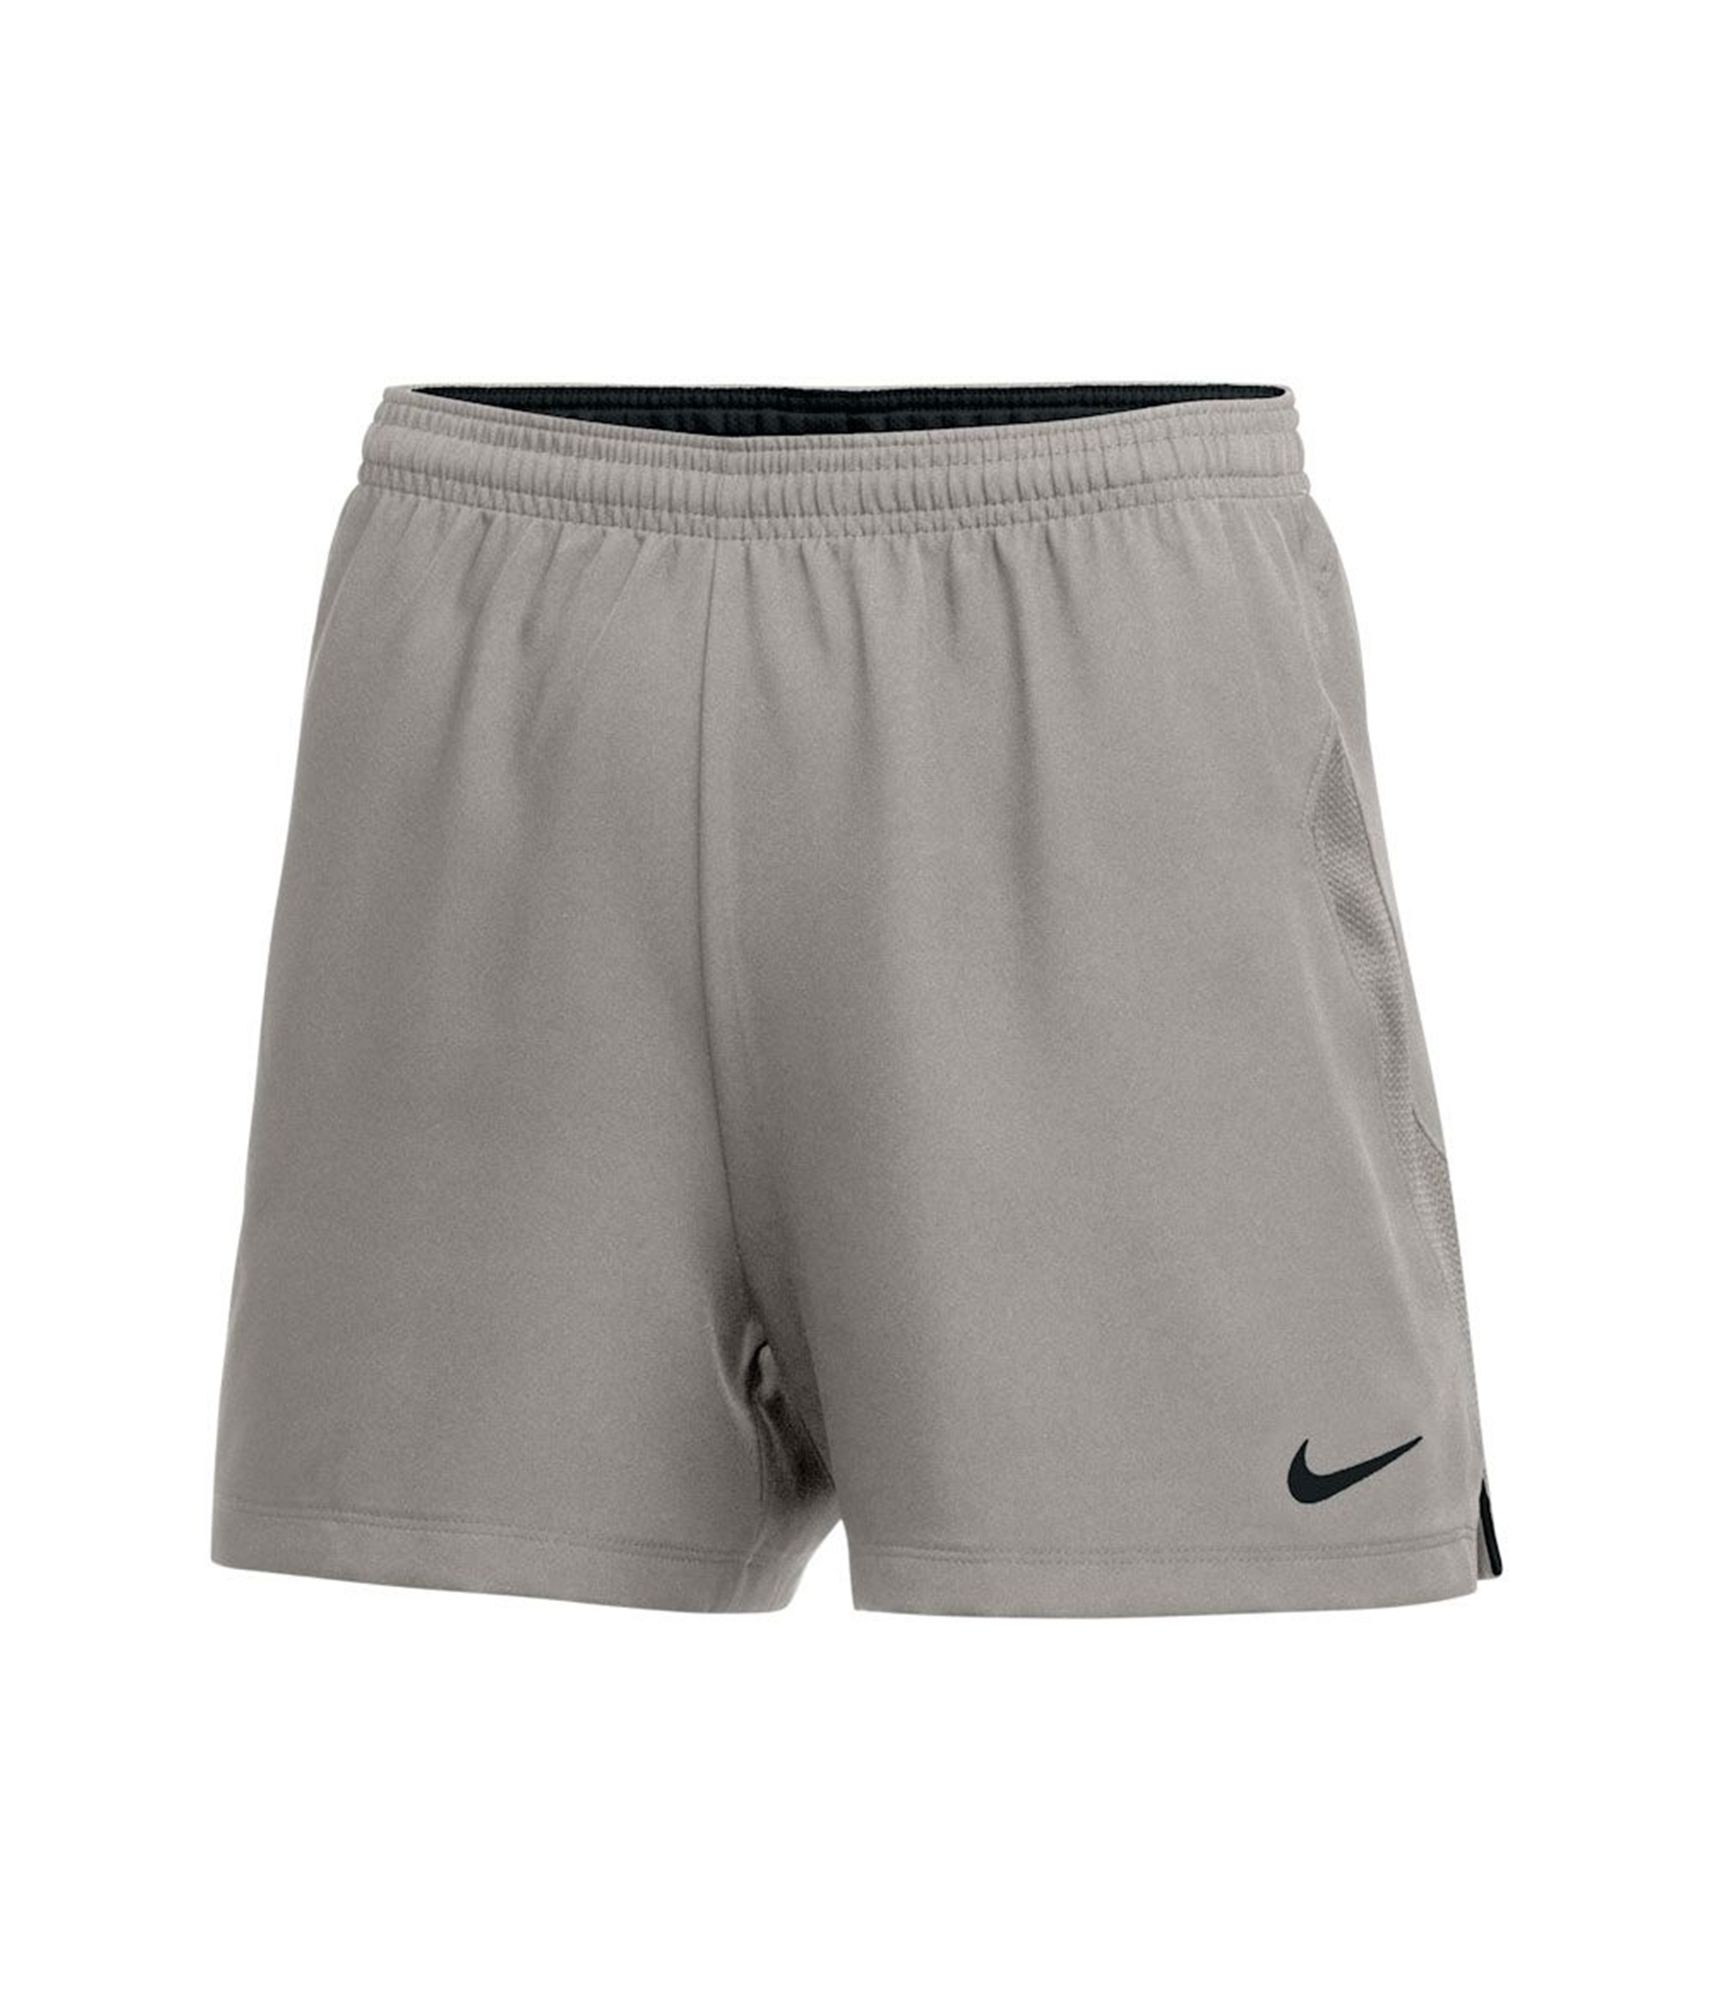 Nike Womens League Knit Ii Soccer Athletic Workout Shorts